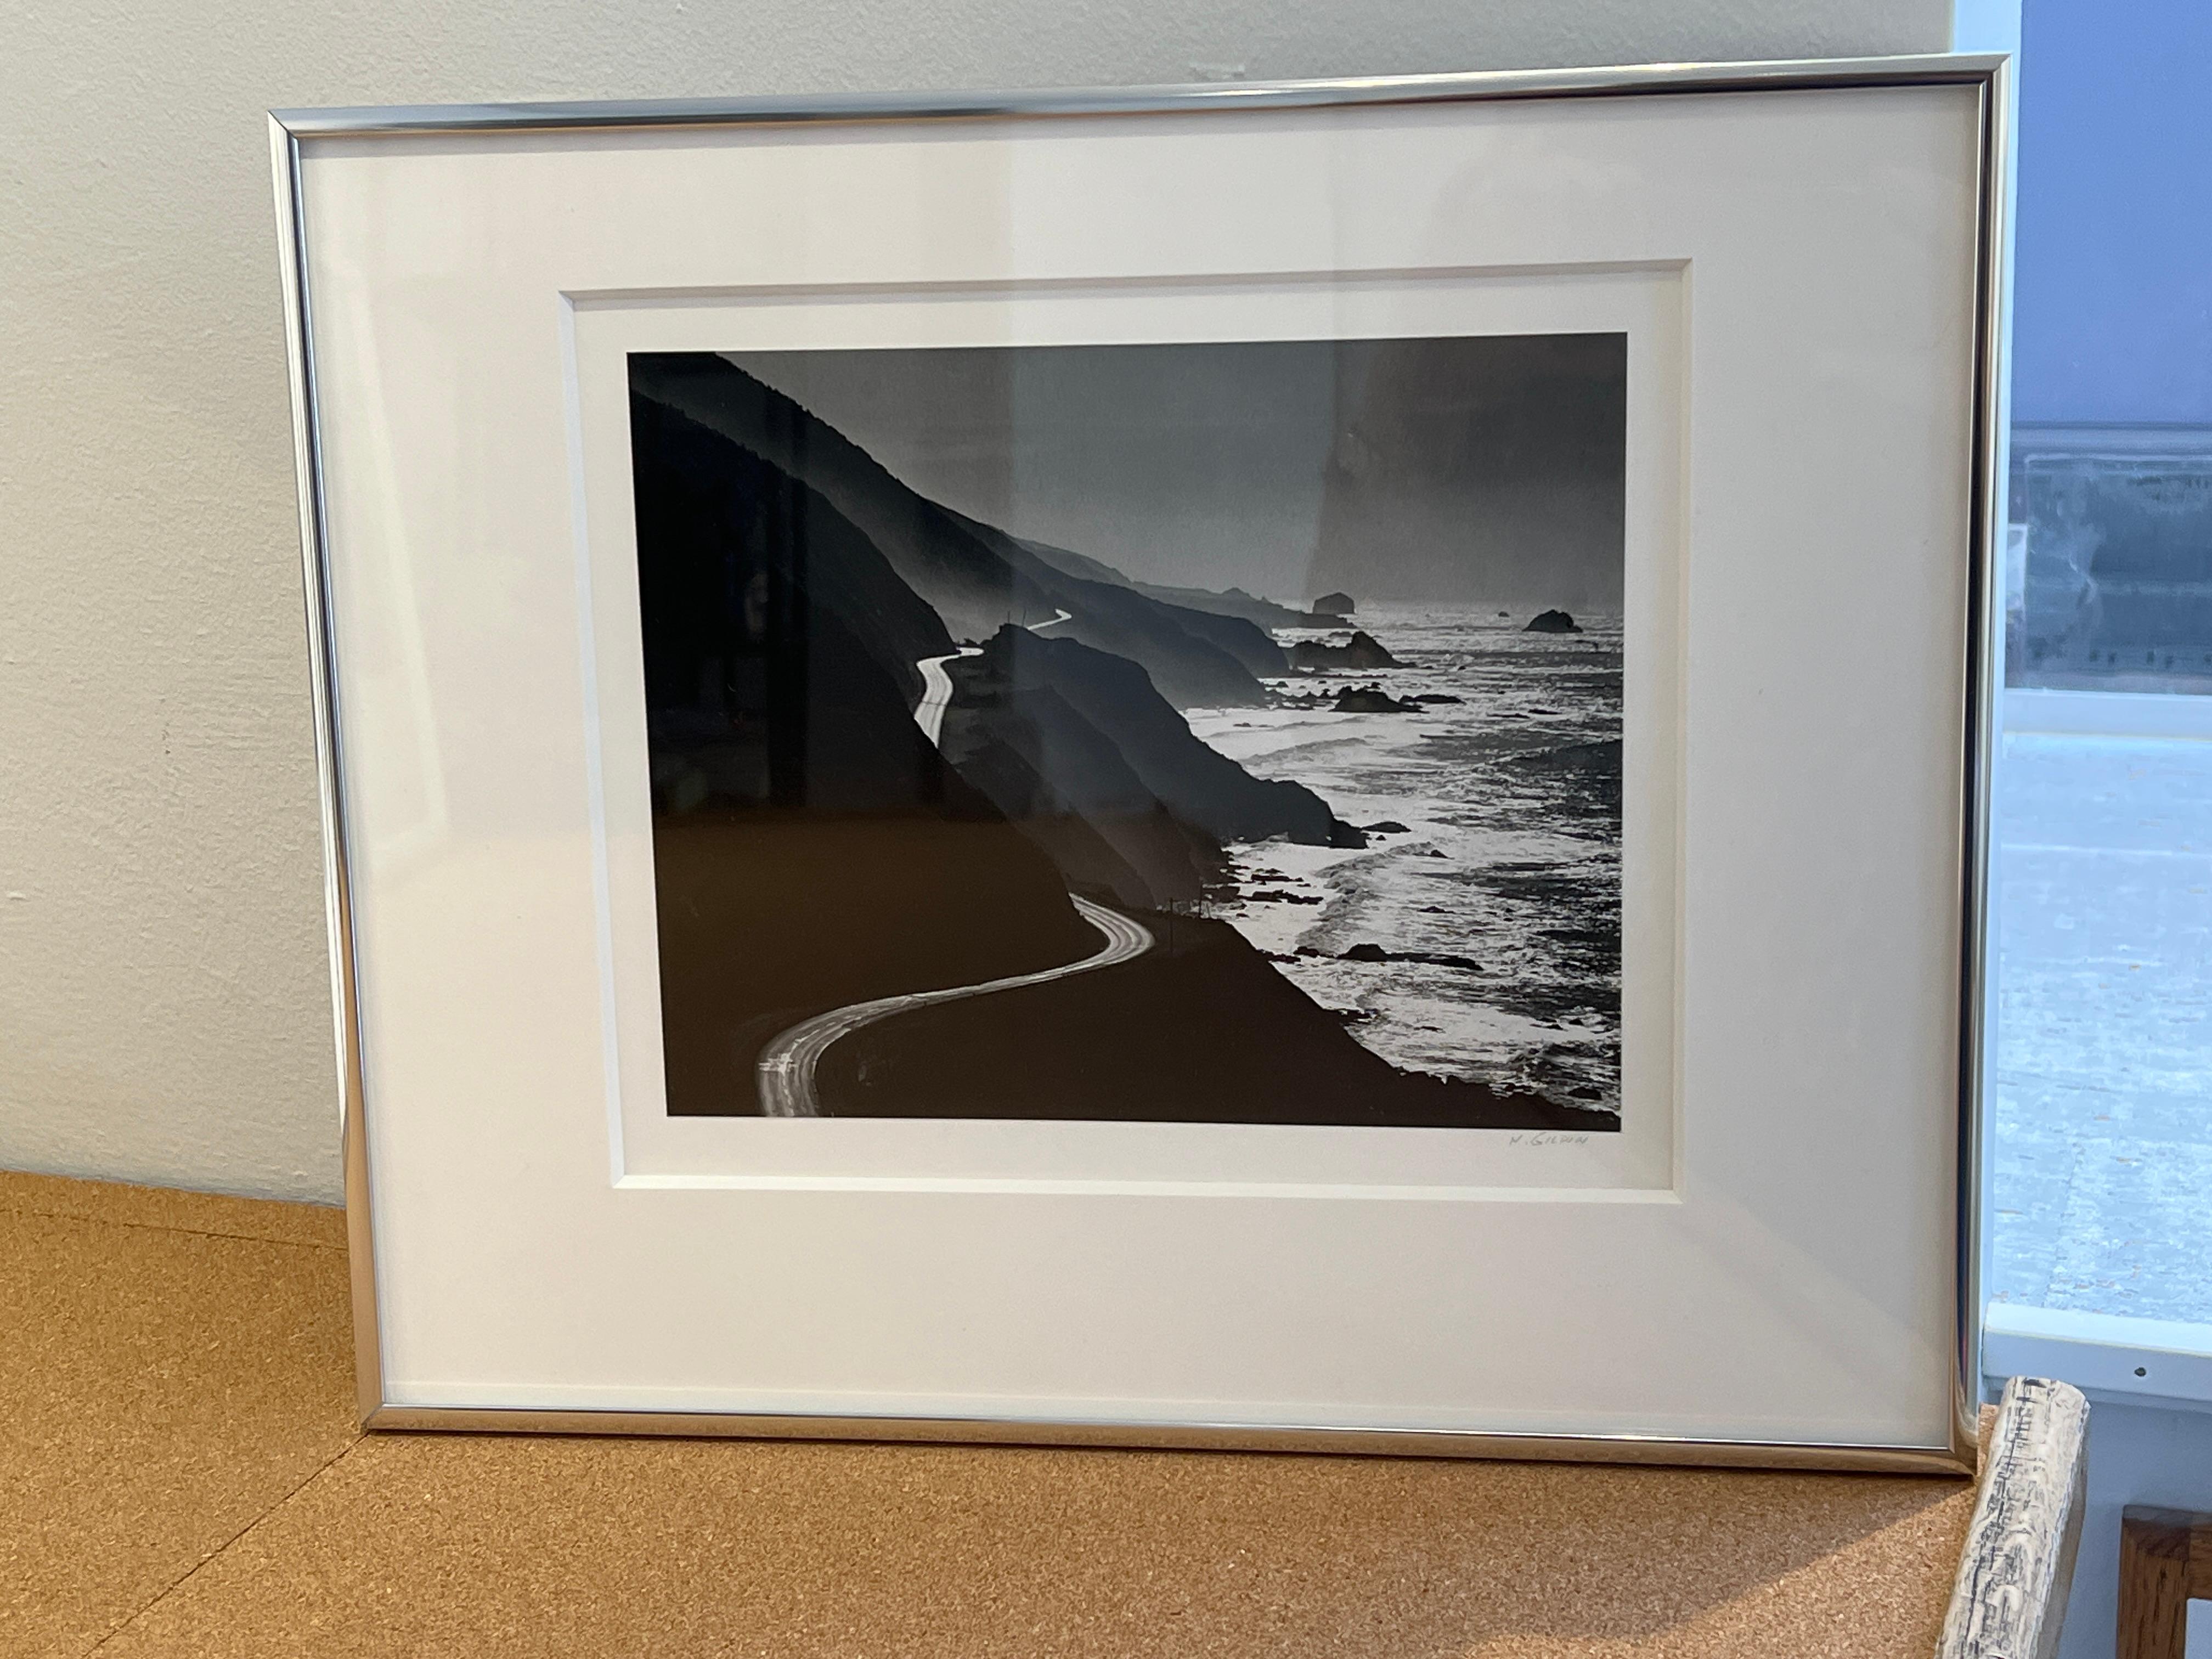 Signed on the front of the mount in ink. Original gelatin silver print by Henry Gilpin. Mounted and framed.